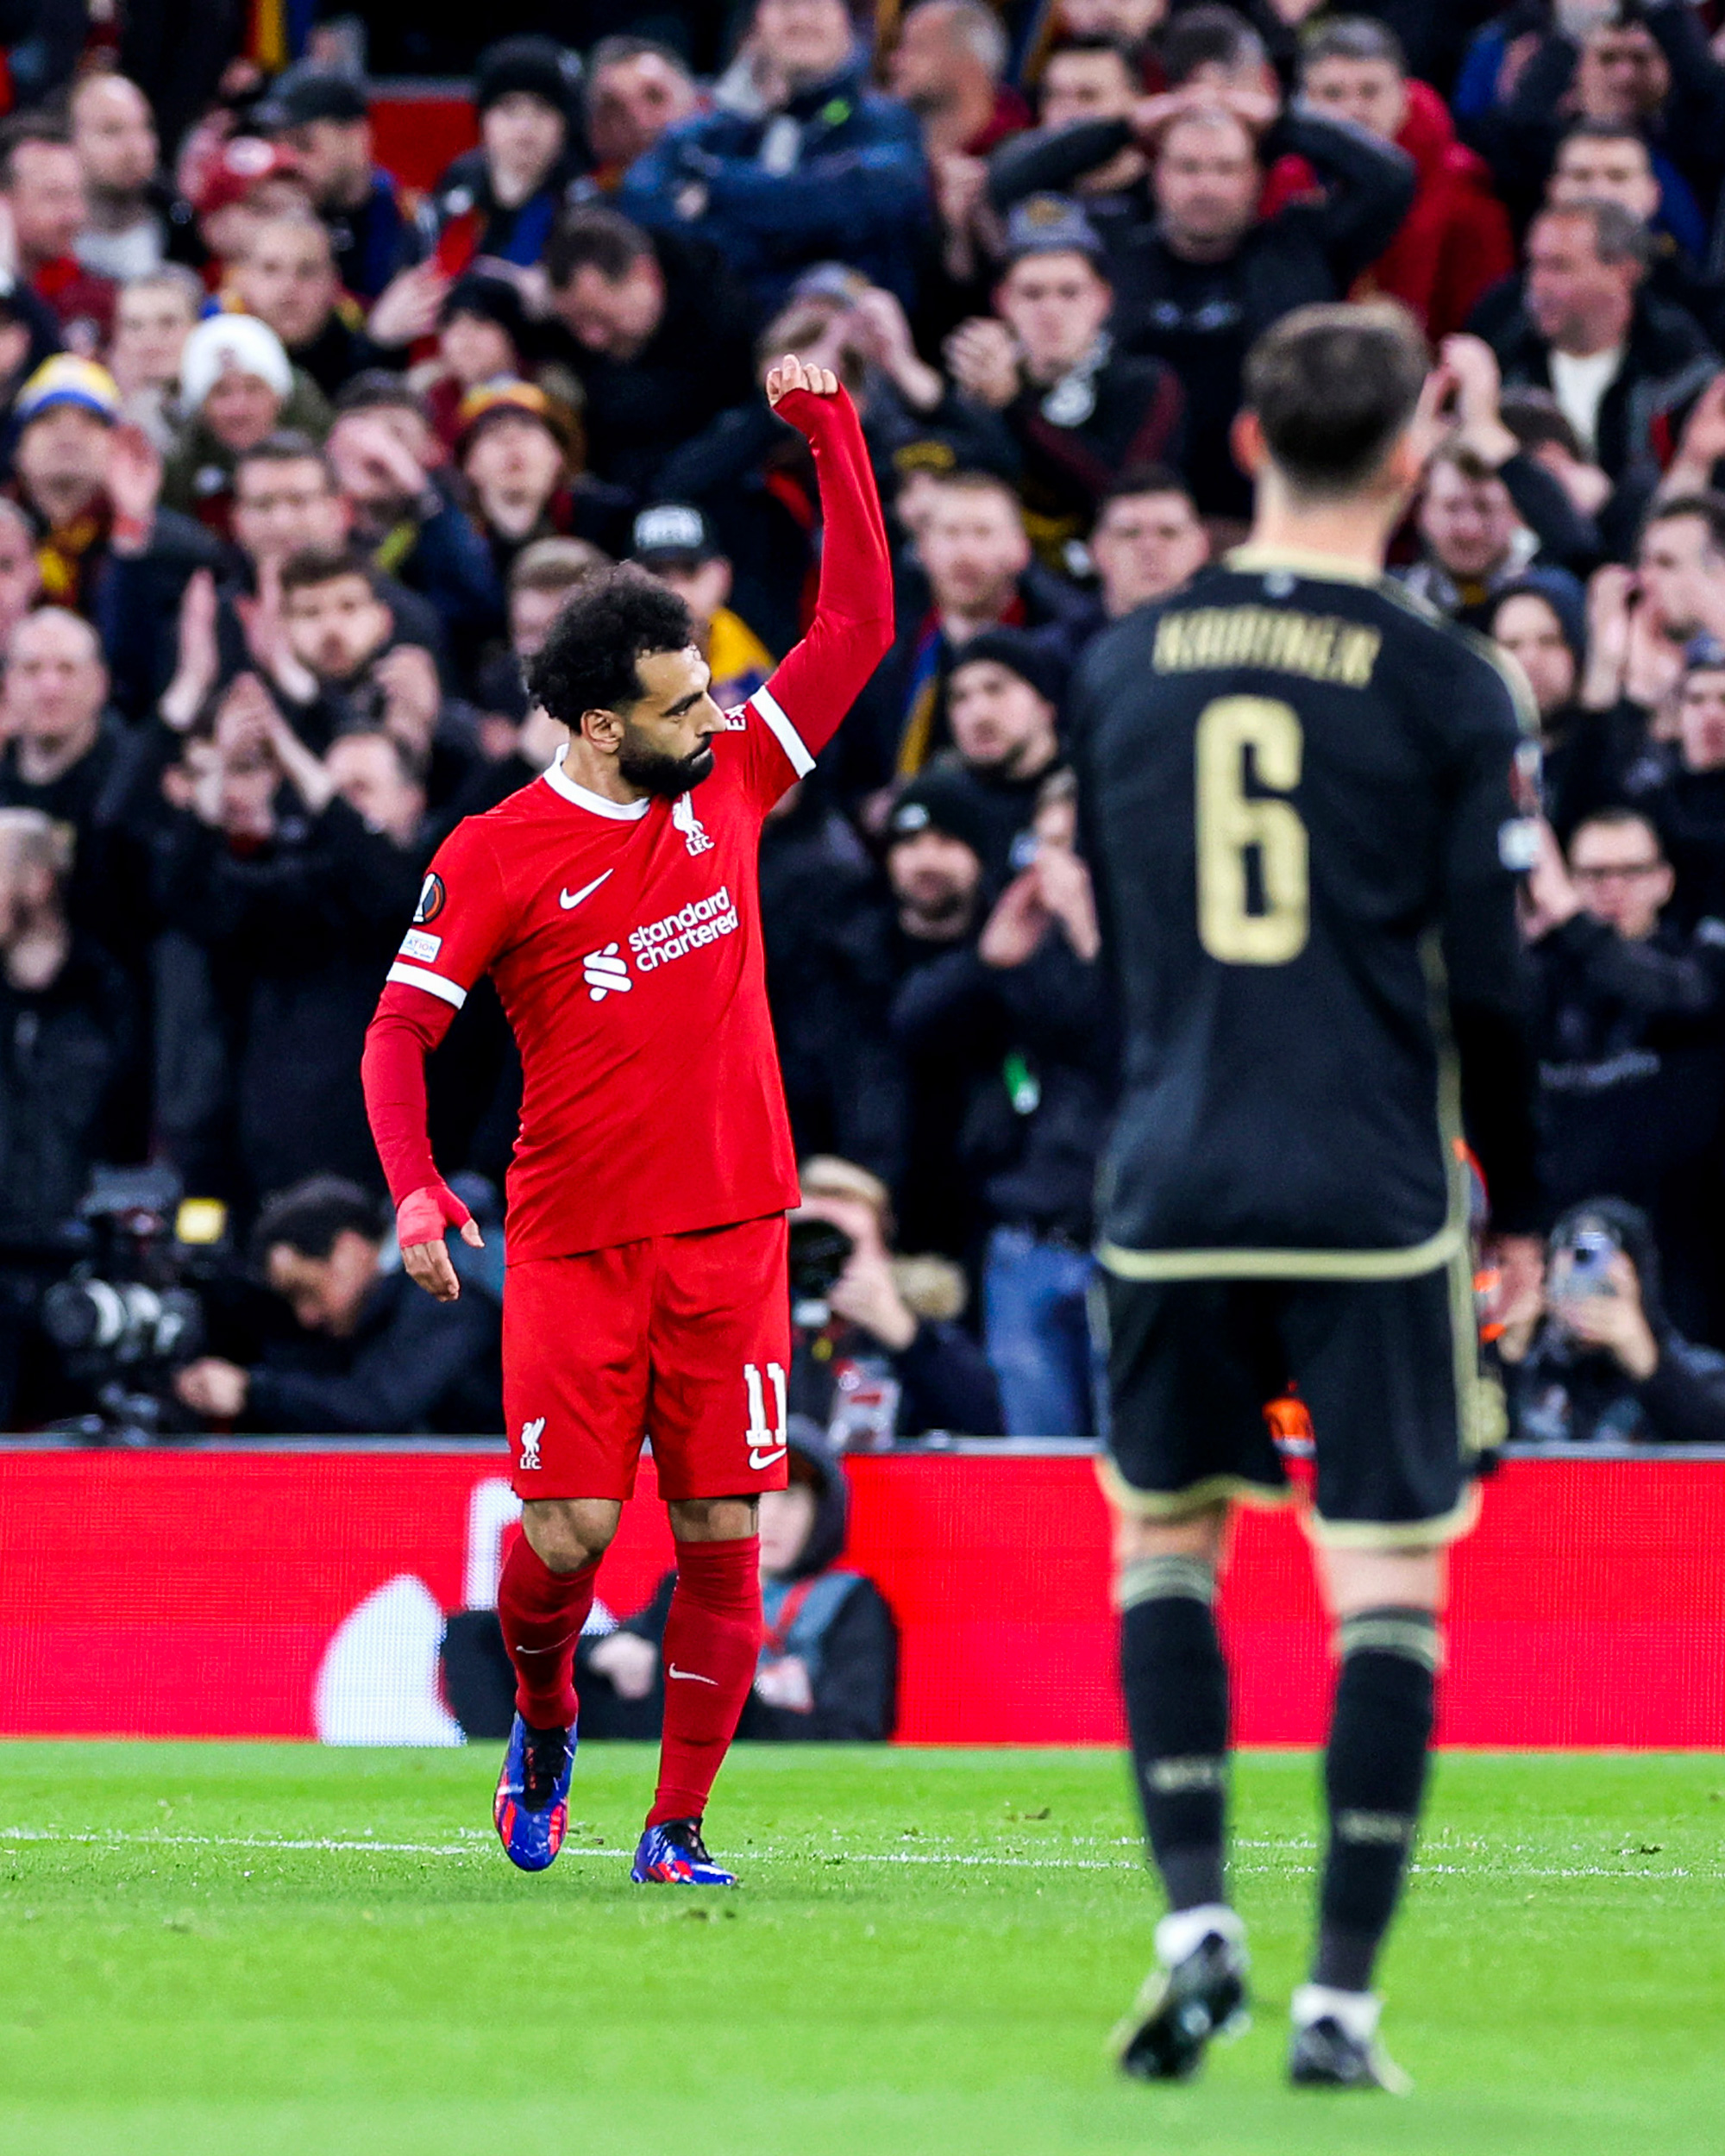 Mo Salah celebrates after scoring his 20th goal of the season in Liverpool's fixture against Sparta Prague.